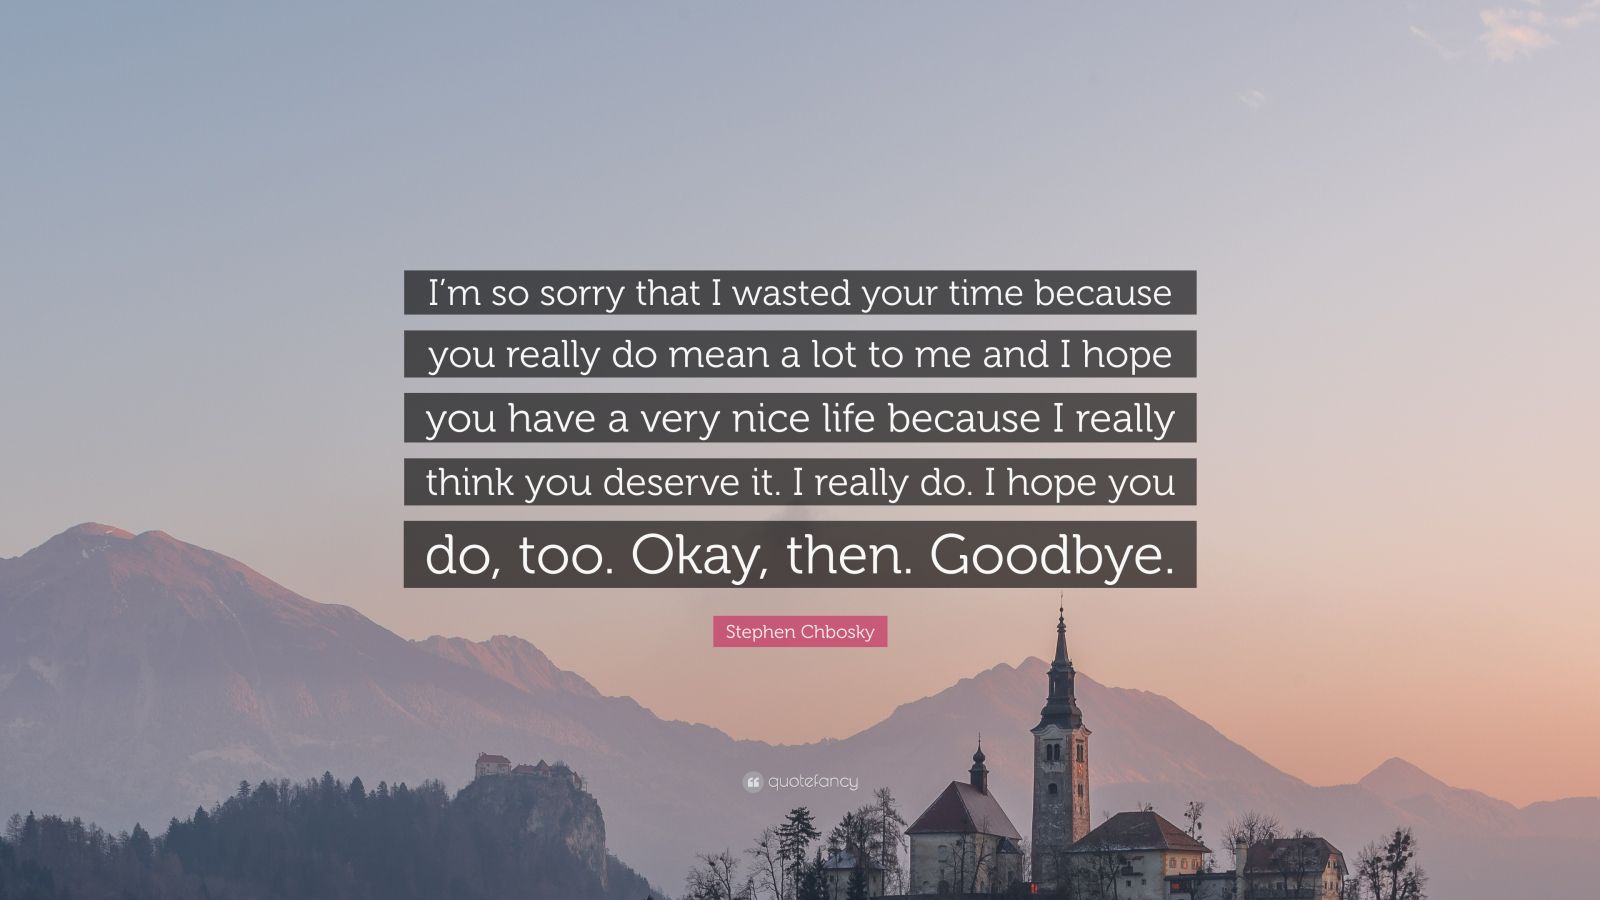 Stephen Chbosky Quote “I’m so sorry that I wasted your time because